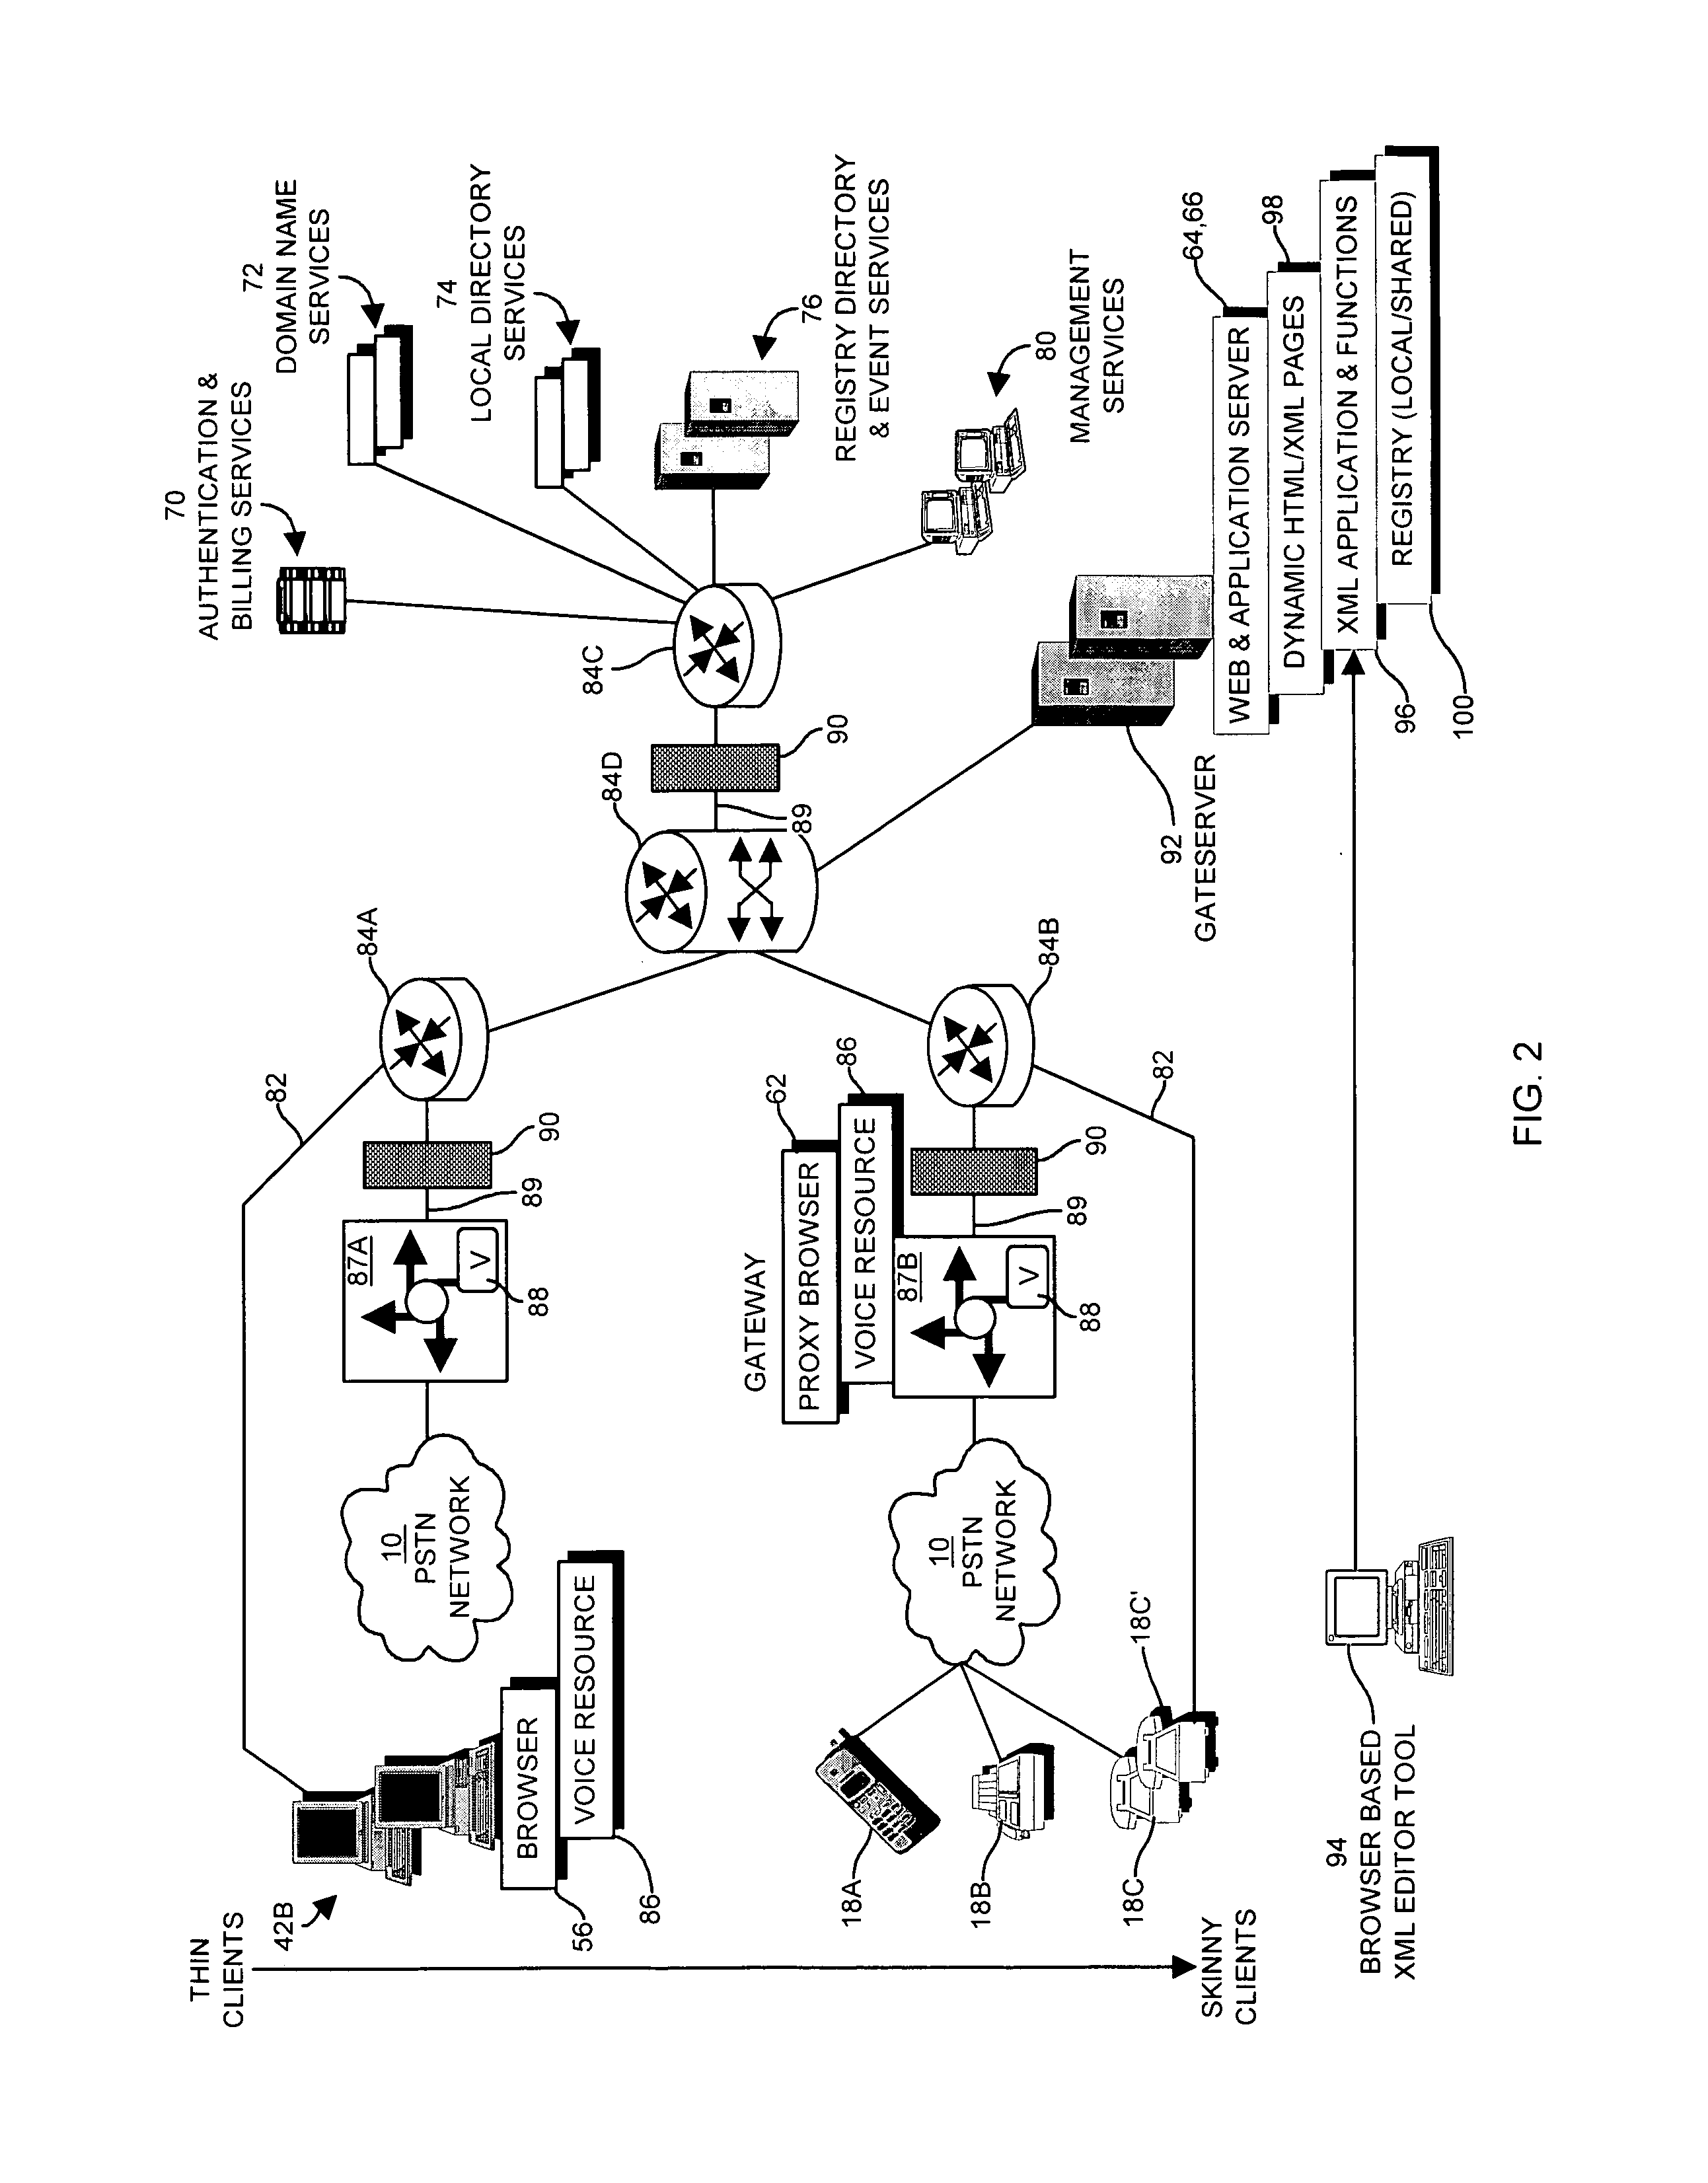 Apparatus and methods for providing network-based information suitable for audio output